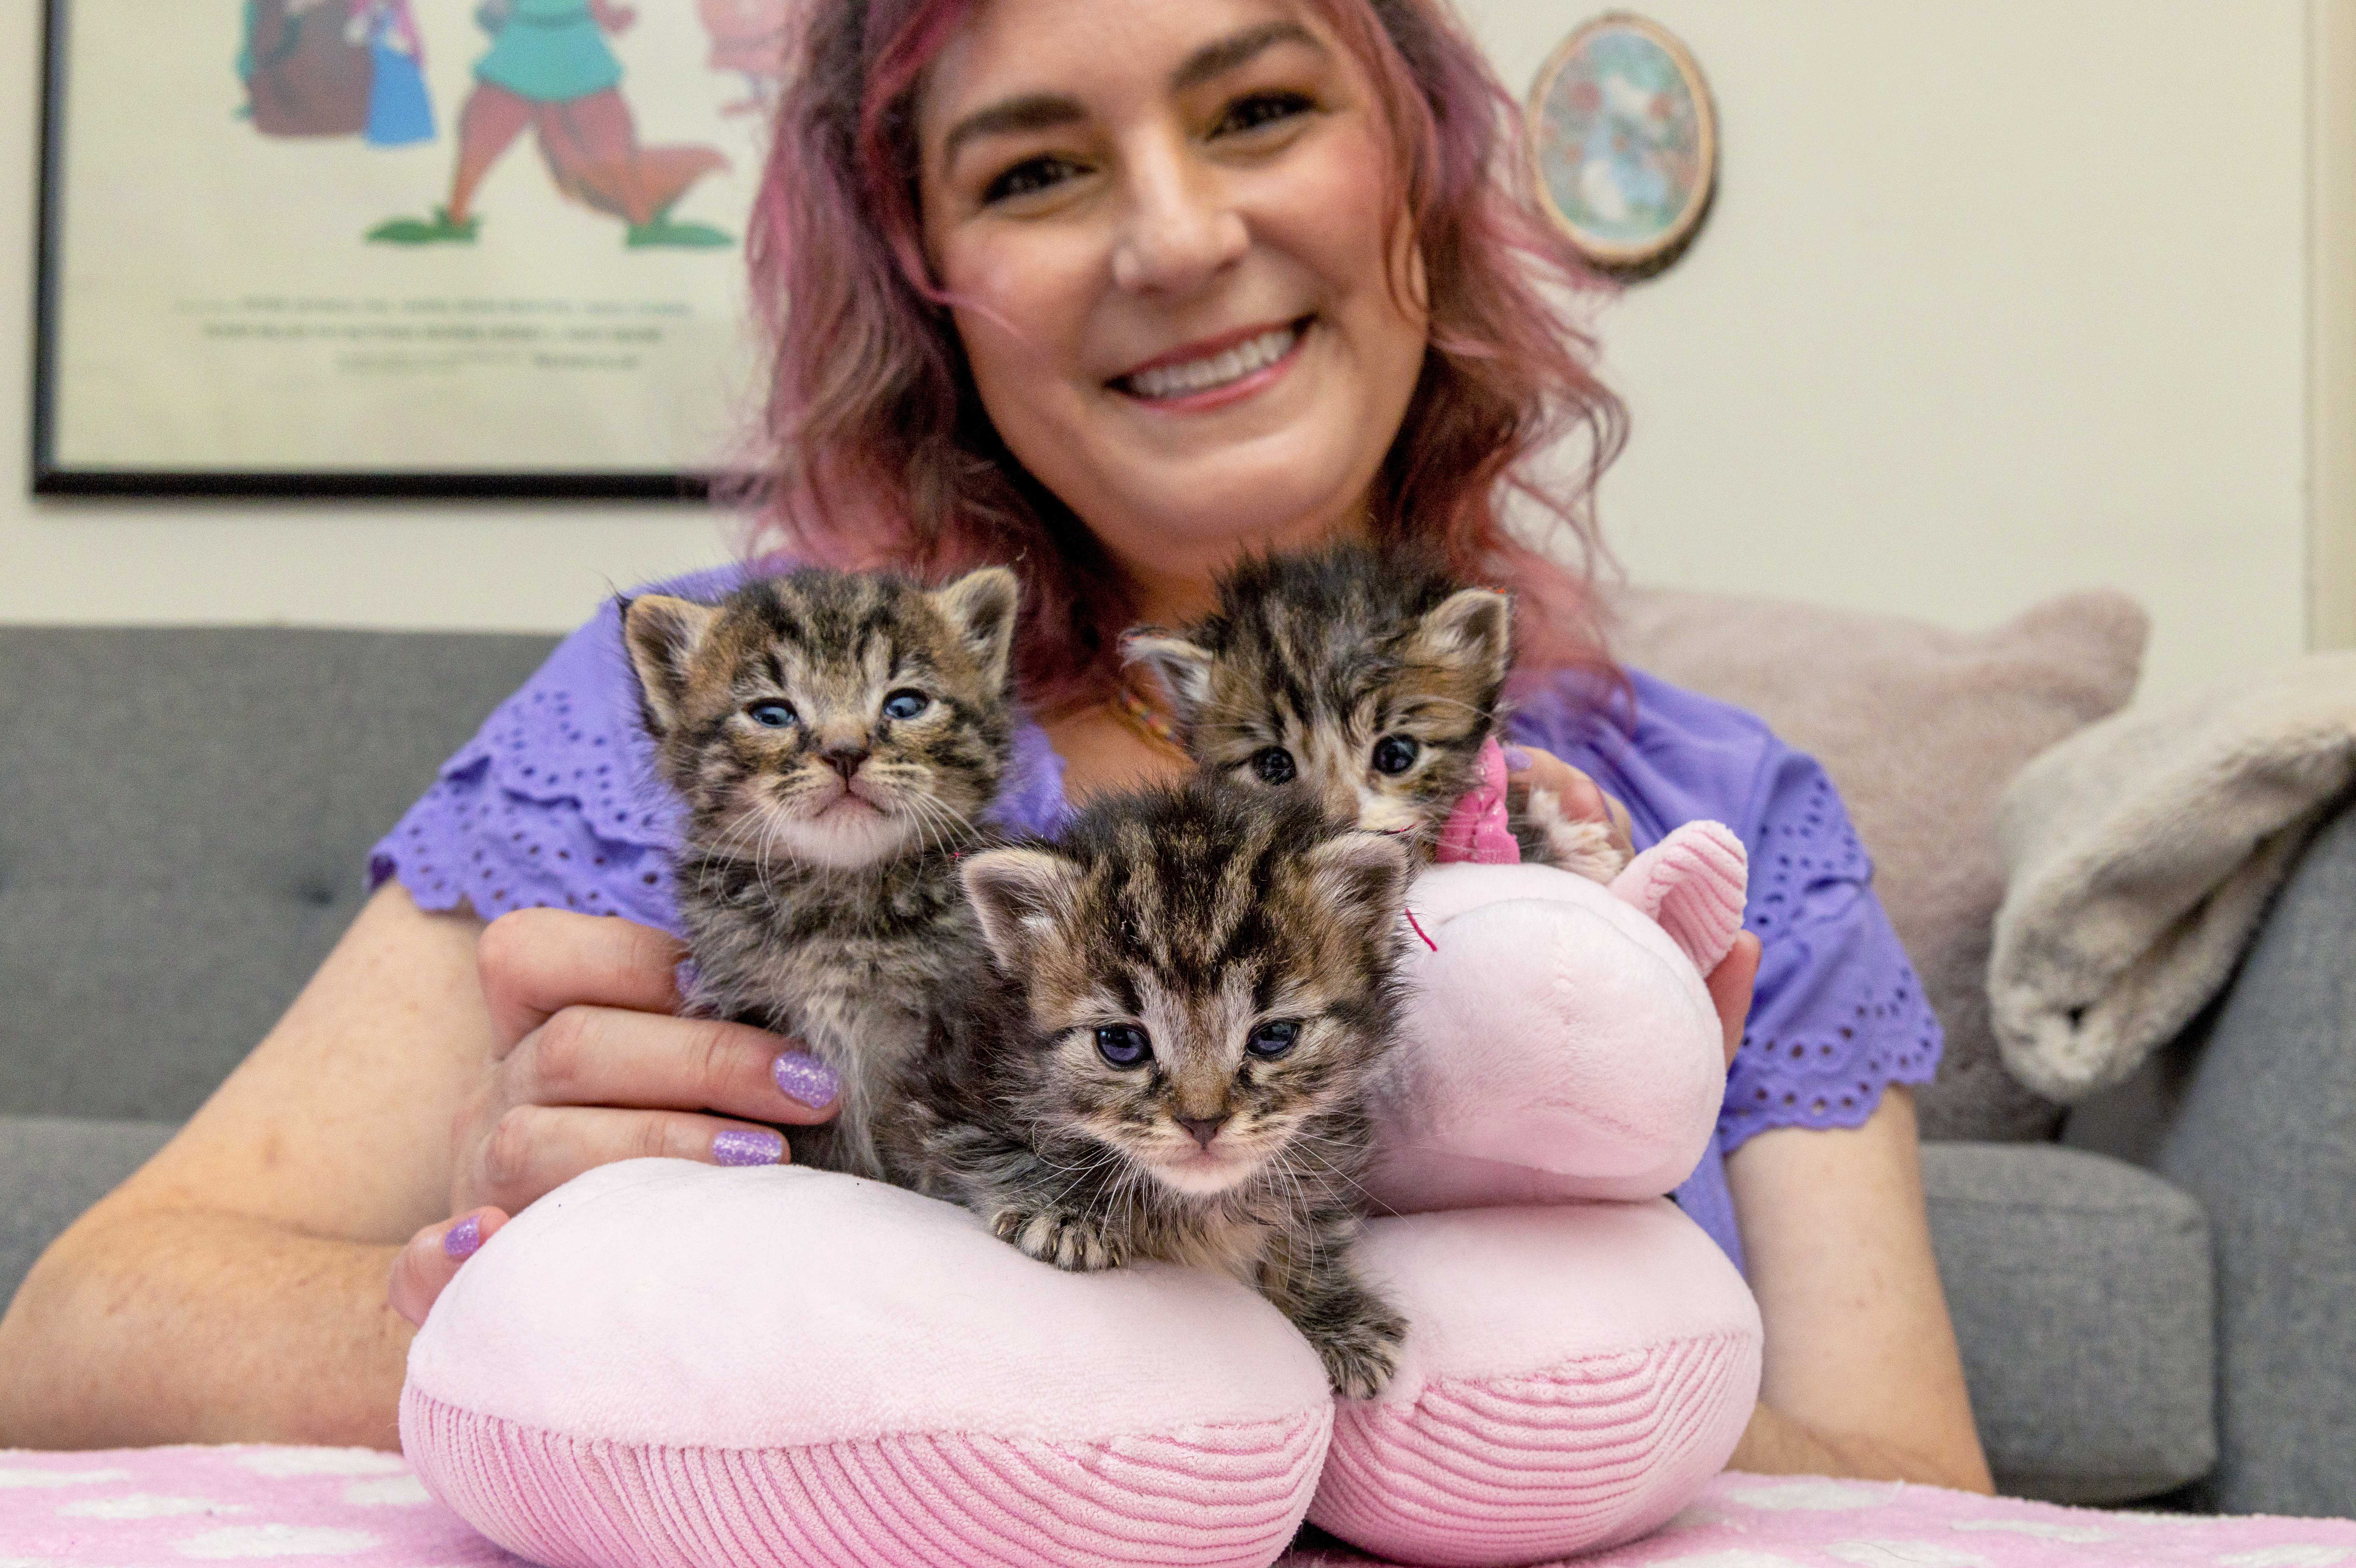 Three tabby kittens on a pink pillow in front of a smiling person